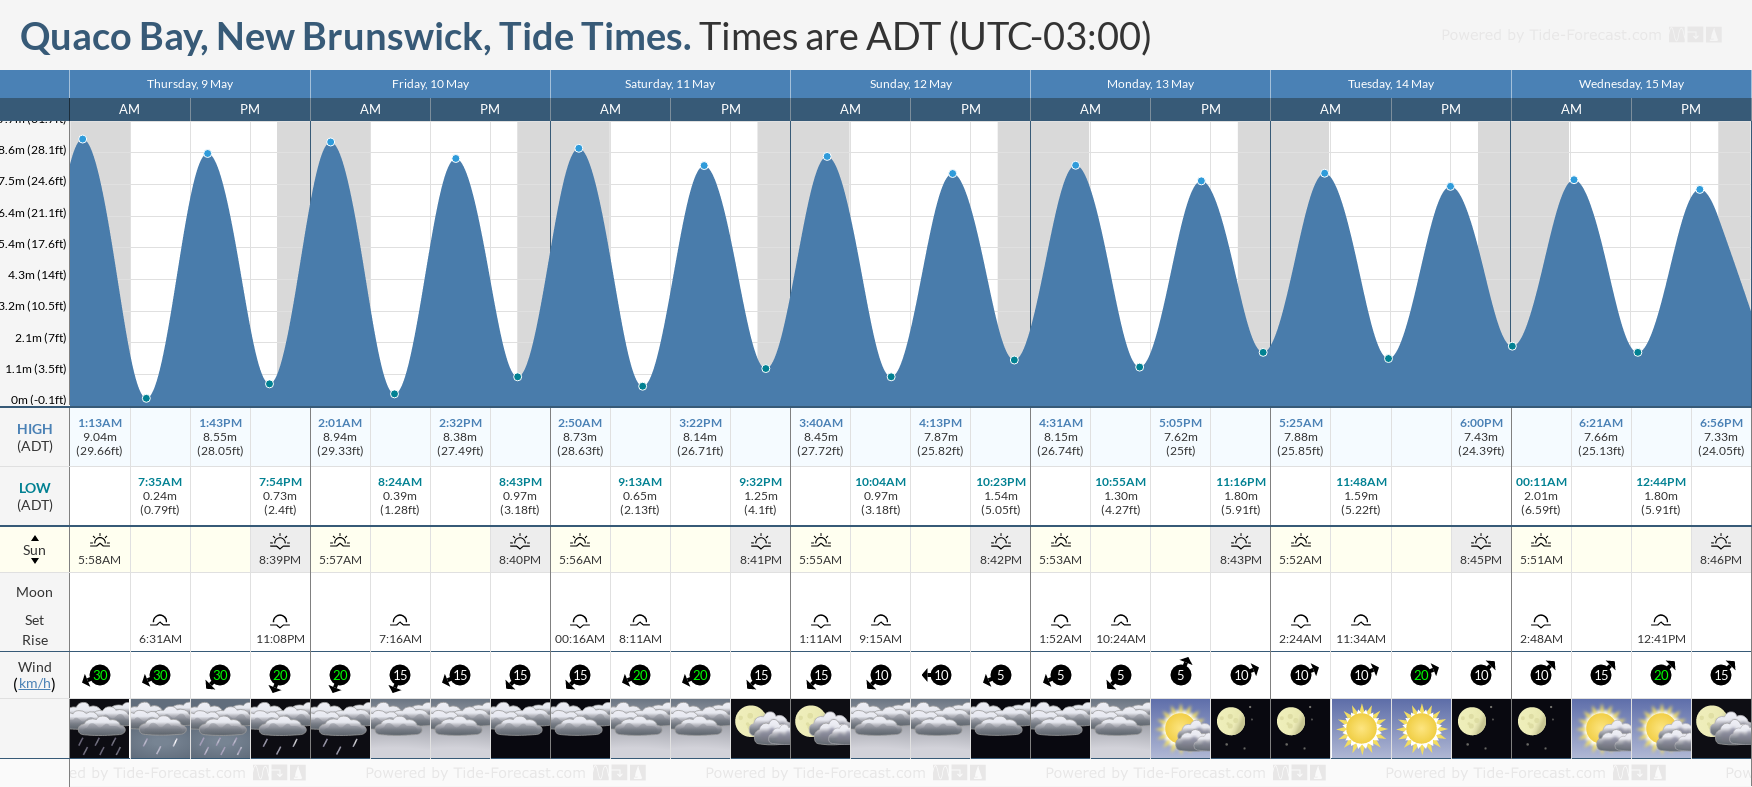 Quaco Bay, New Brunswick Tide Chart including high and low tide tide times for the next 7 days